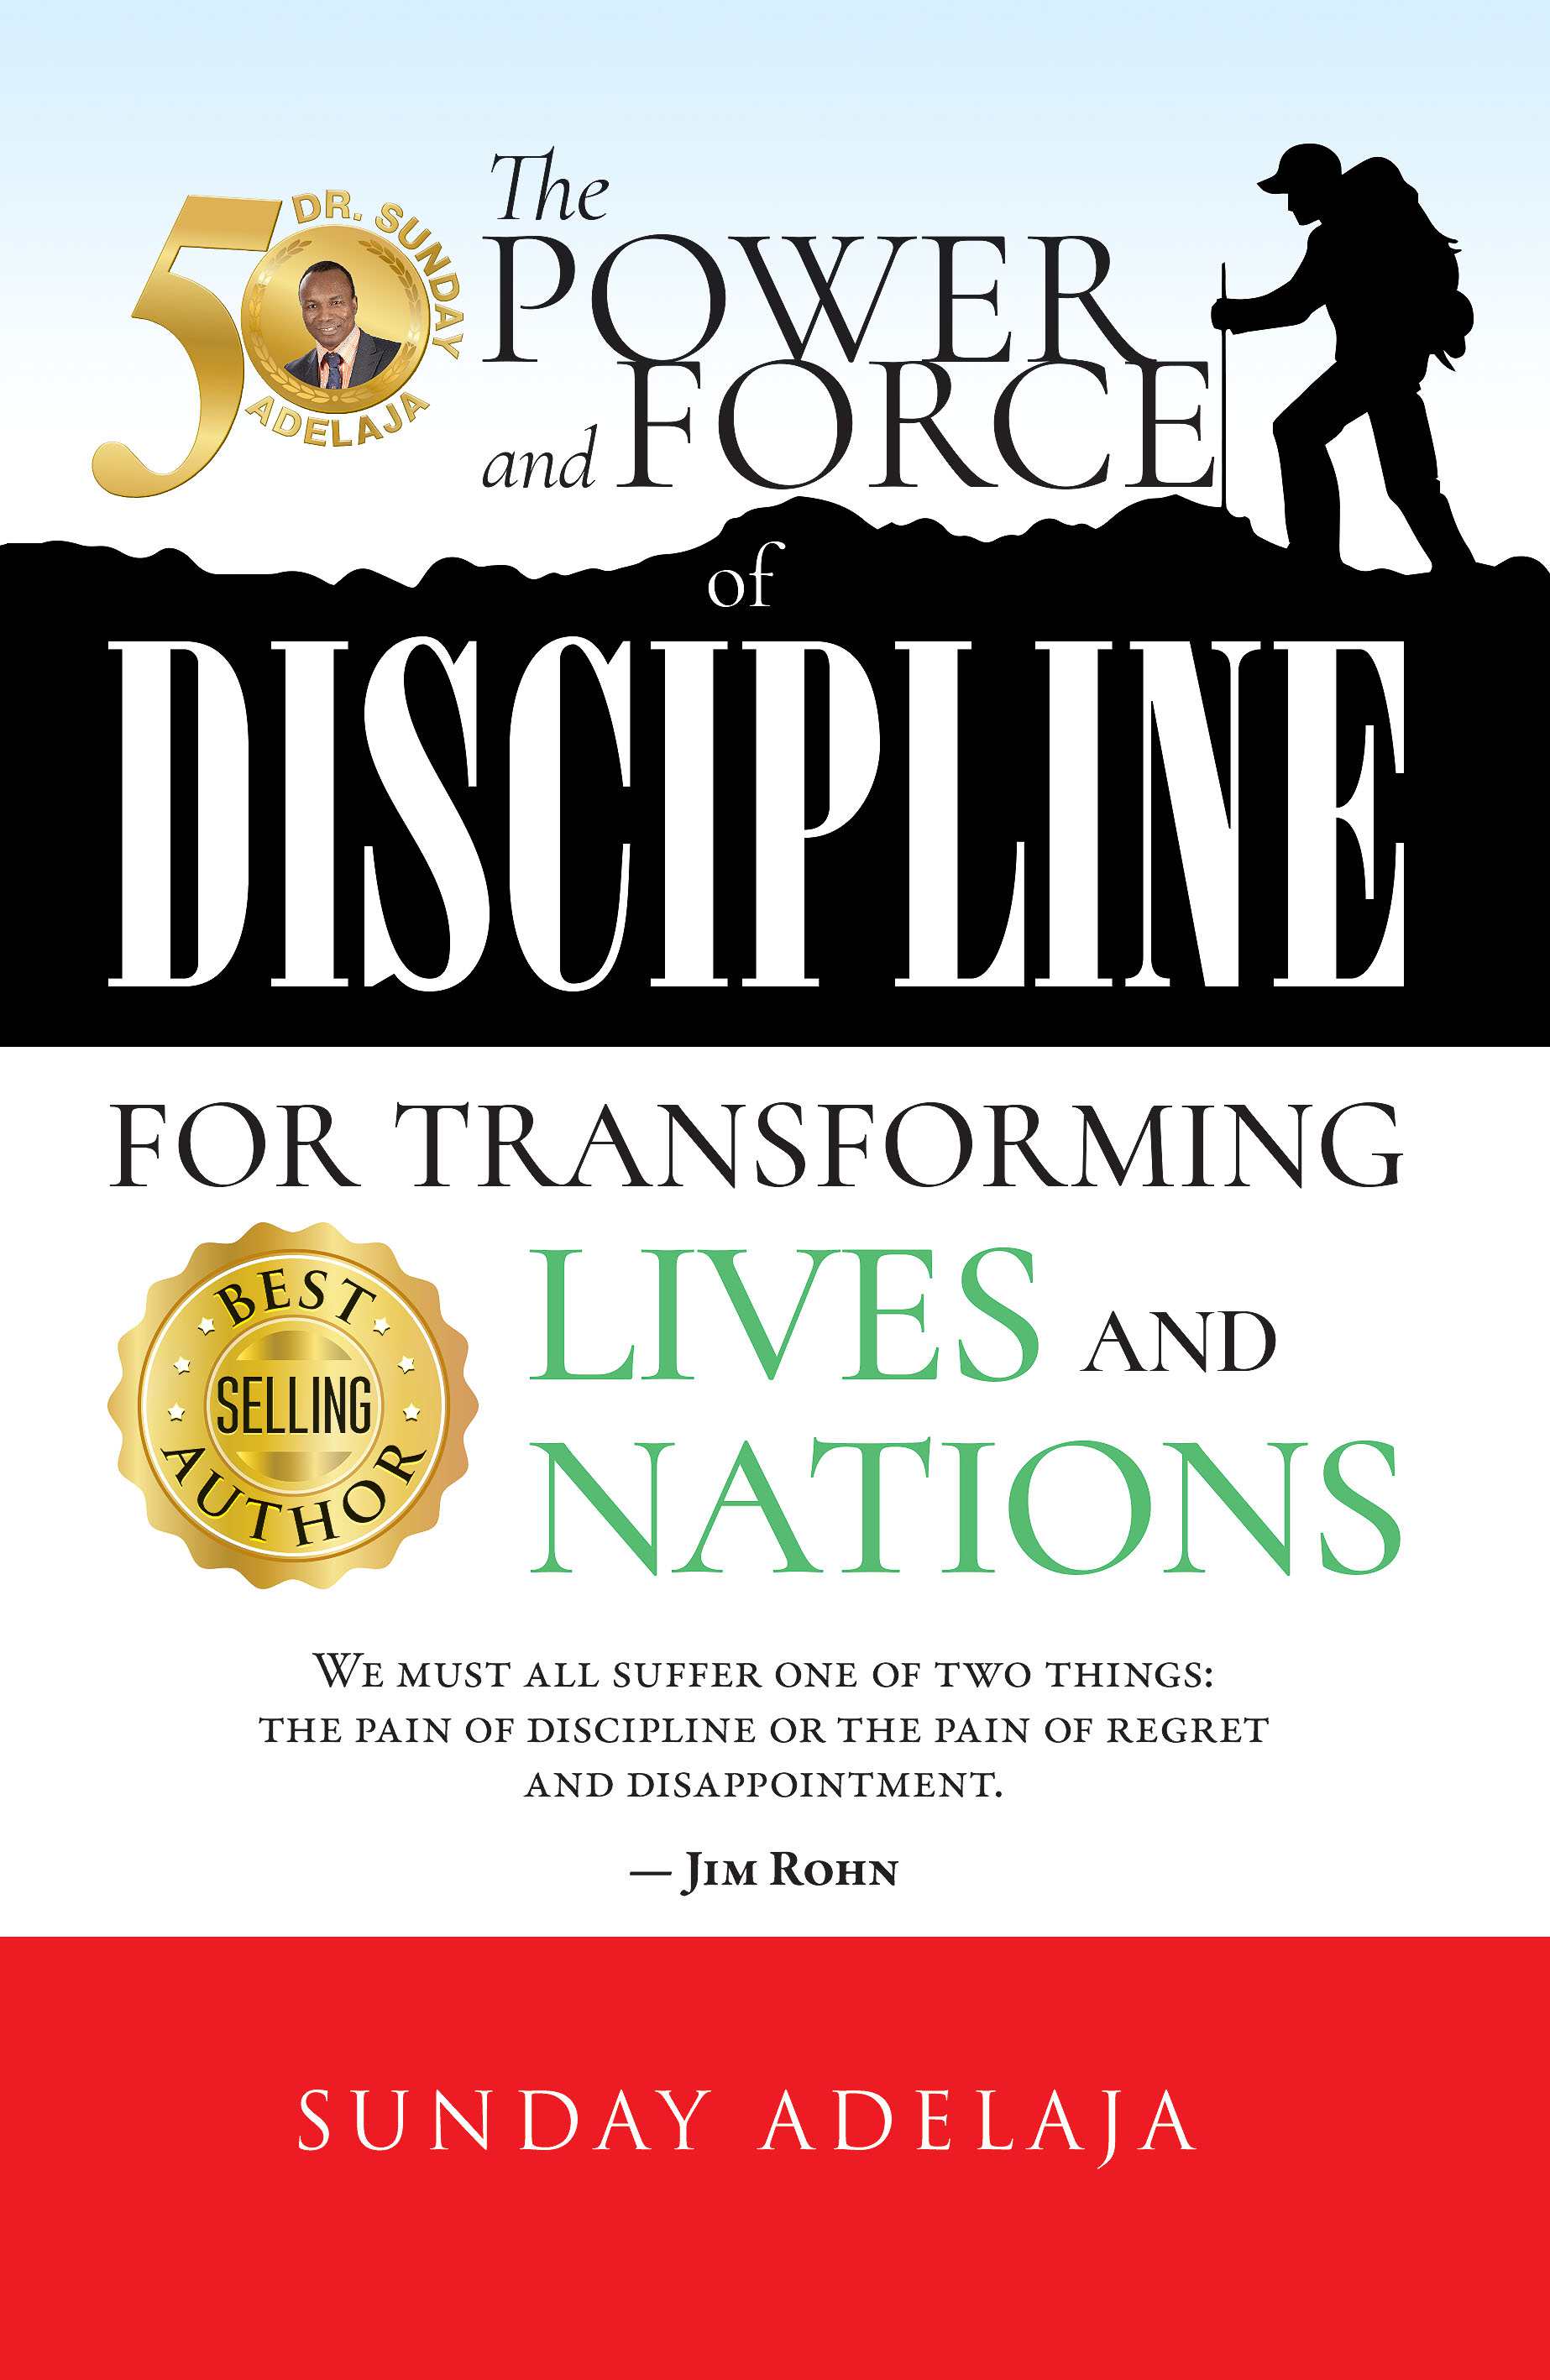 The-power-and-force-of-discipline-for-transforming-lives-and-nation